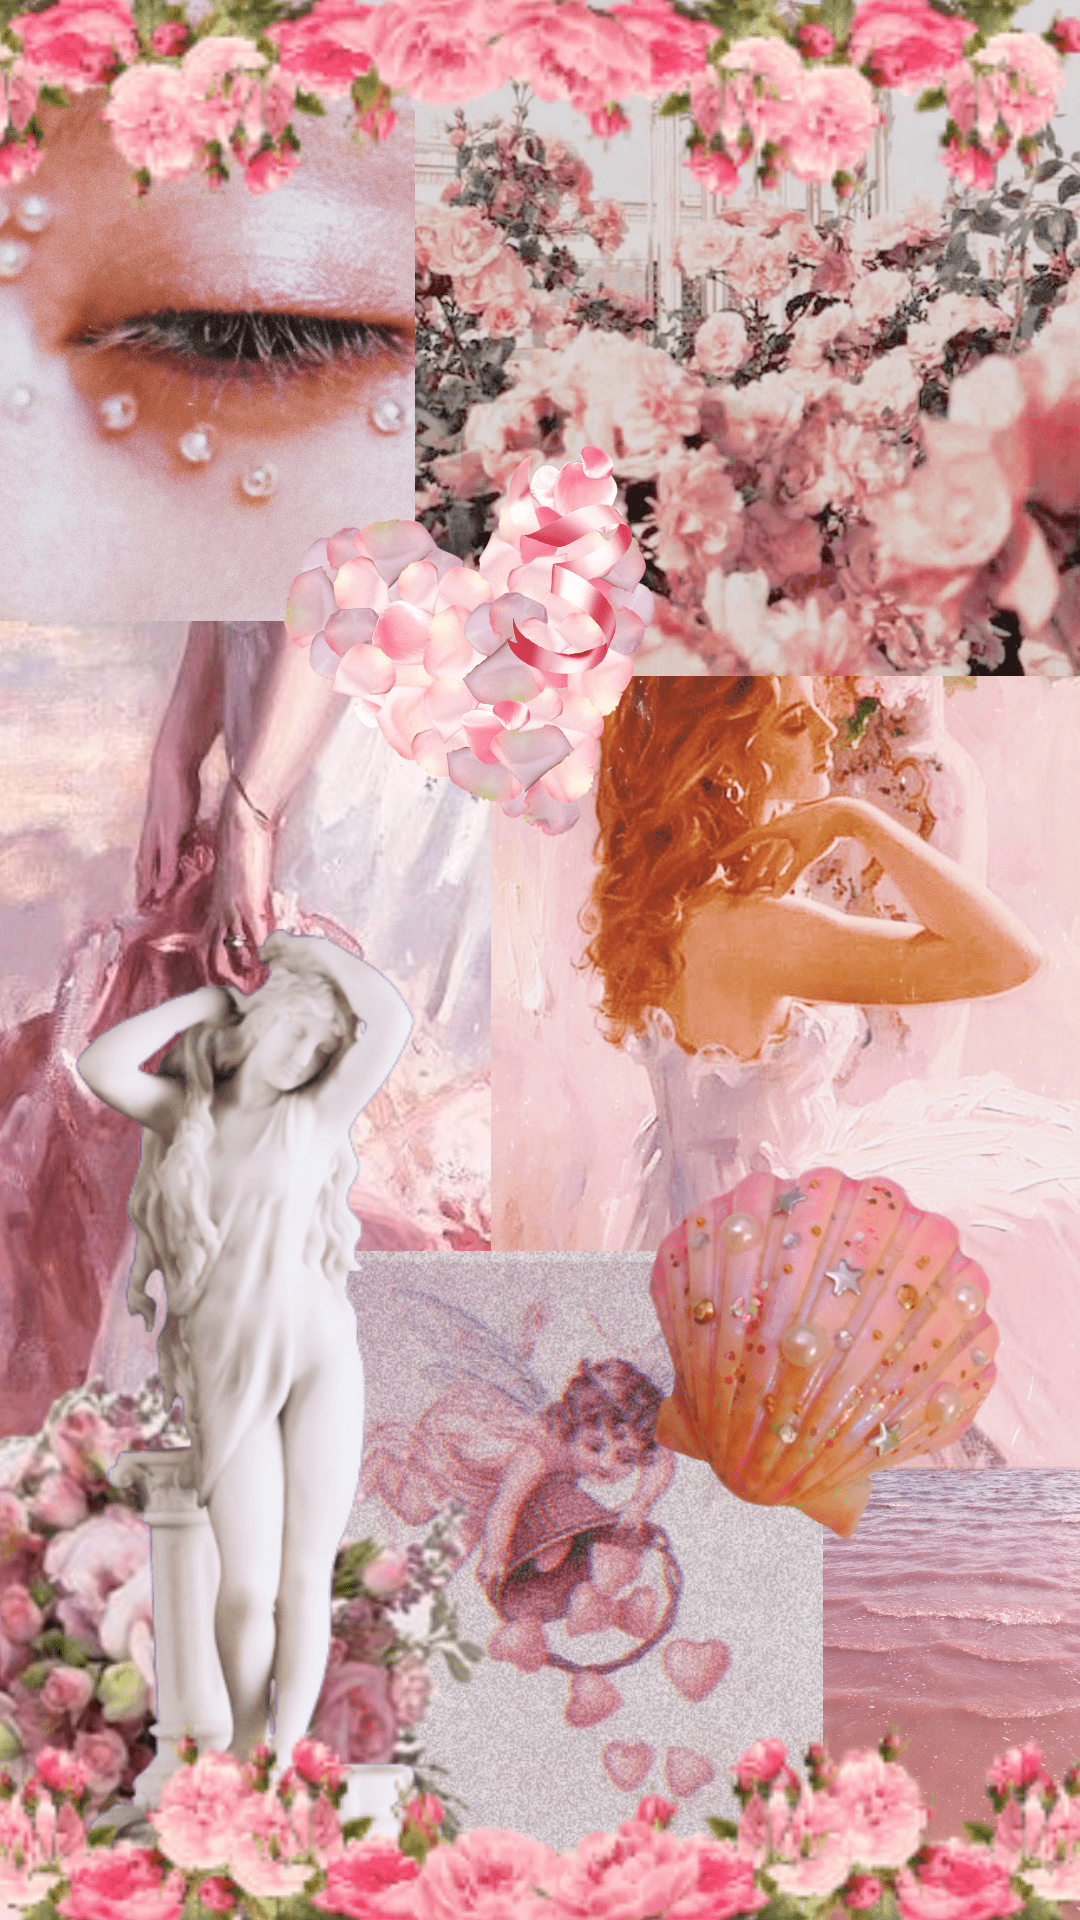 A collage of images in pink and white, including flowers, a statue, and a girl. - Greek mythology